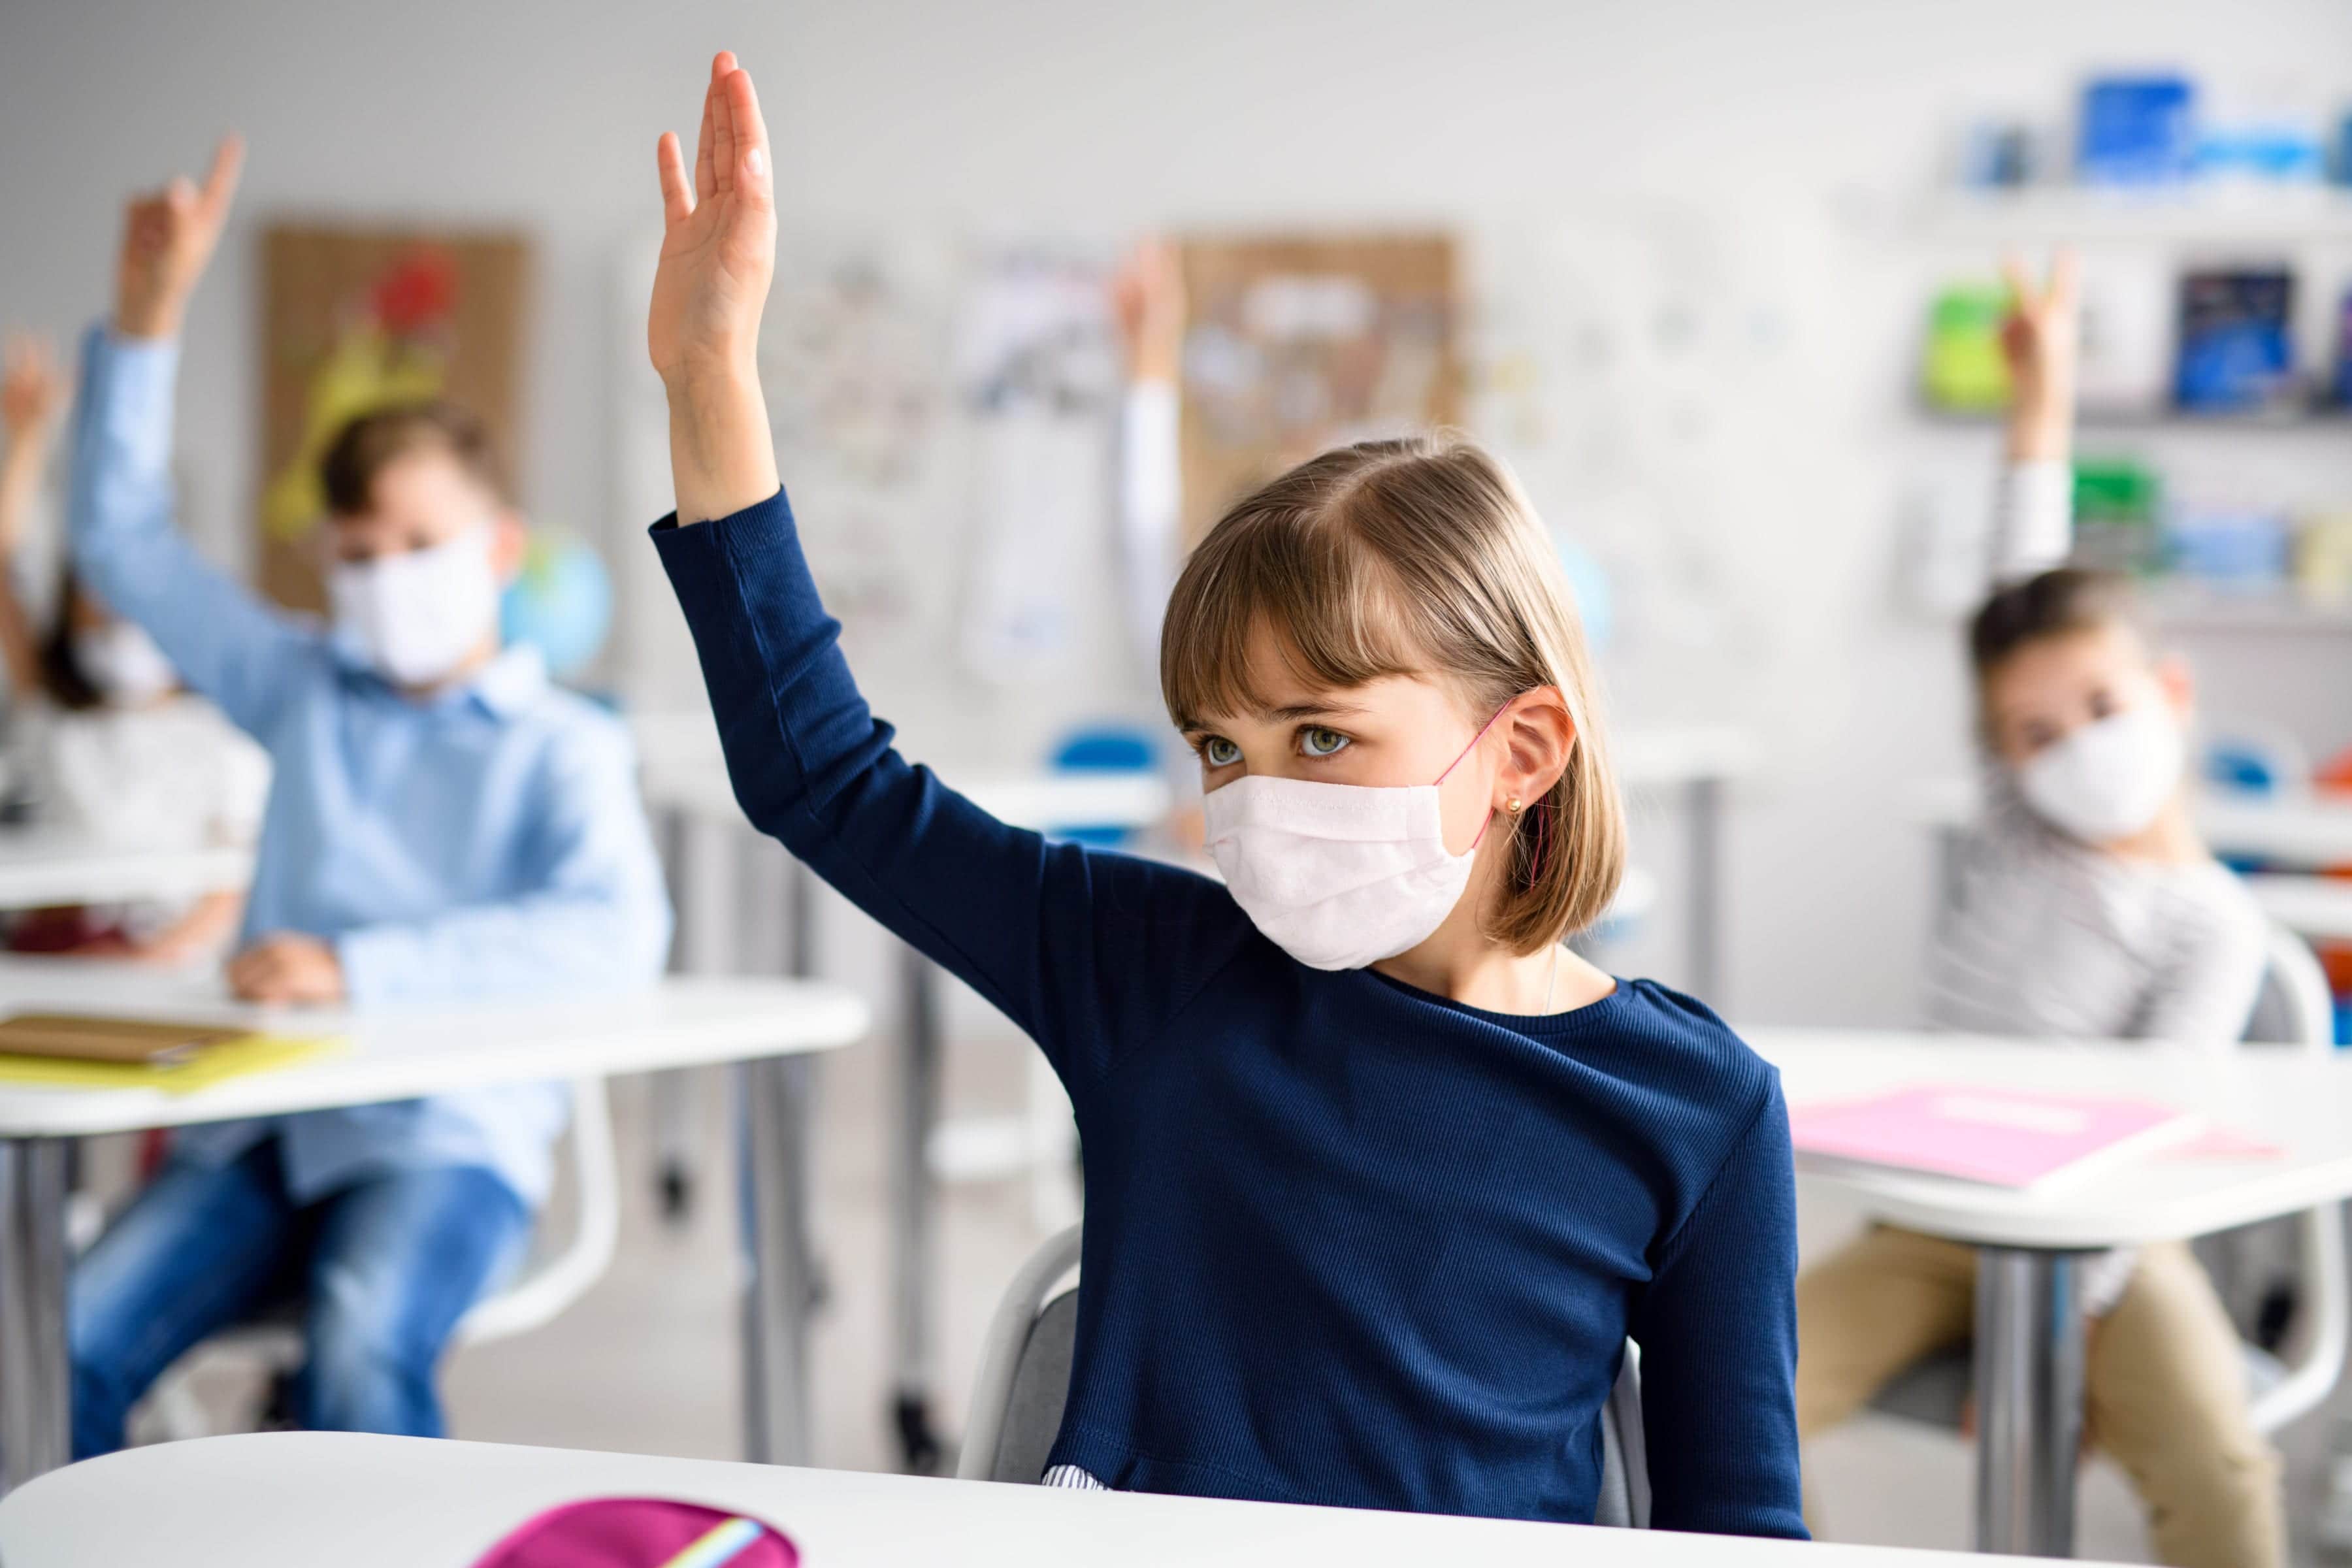 child-with-face-mask-back-at-school-after-covid-19-JNMLF65.jpg